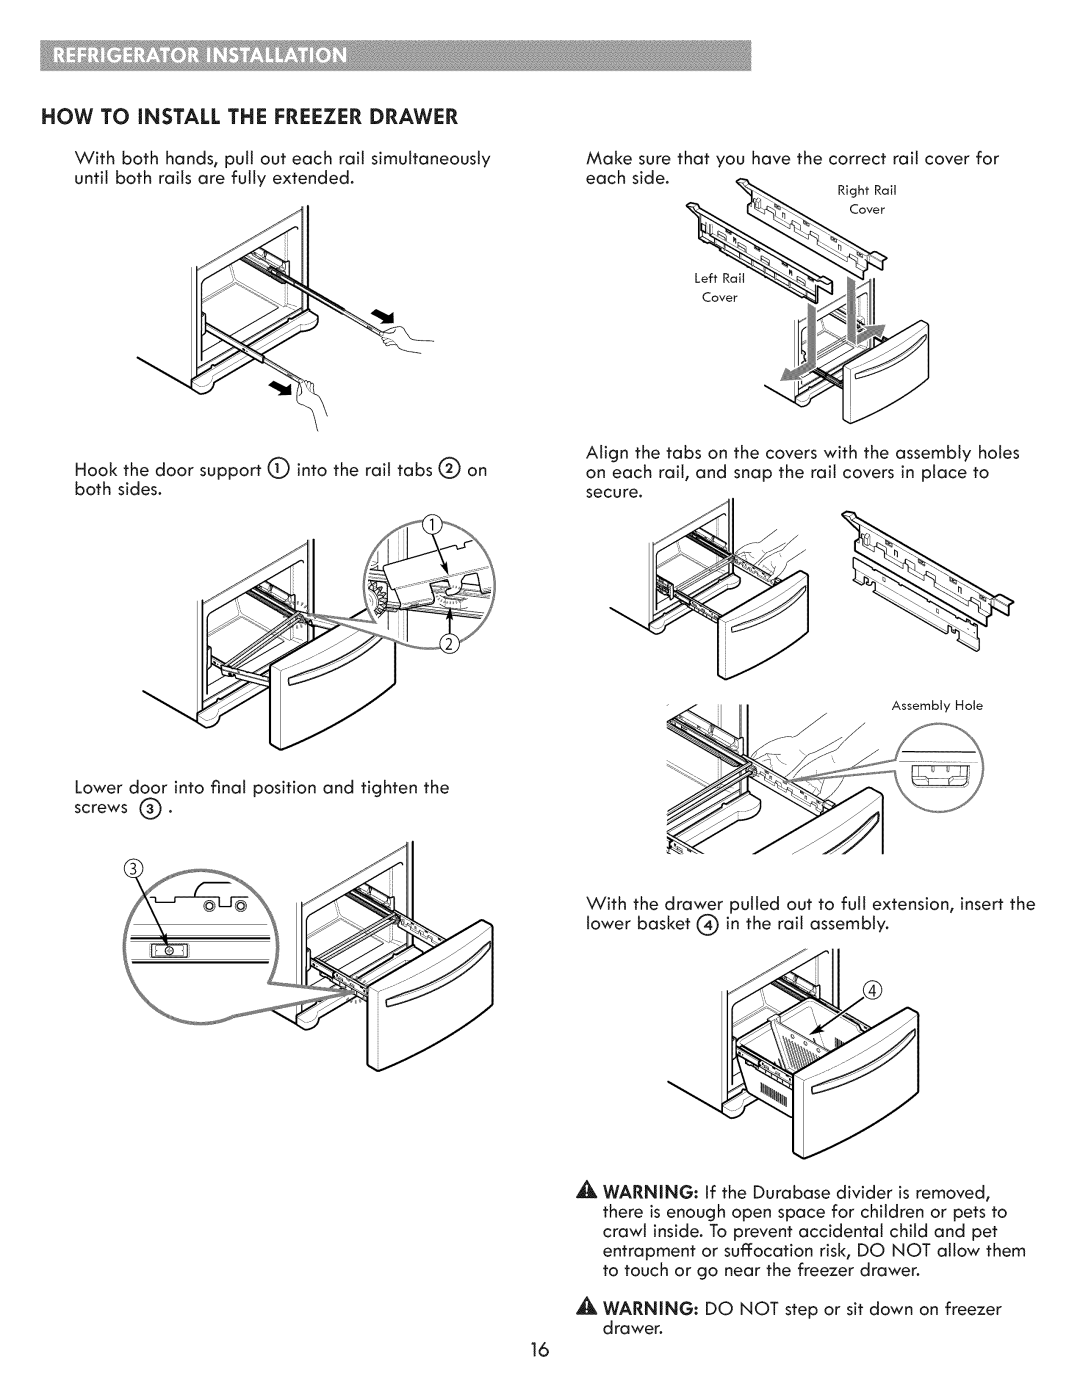 Kenmore 795.7202 manual L_-_-..Iii, Hole, How To Install The Freezer Drawer 